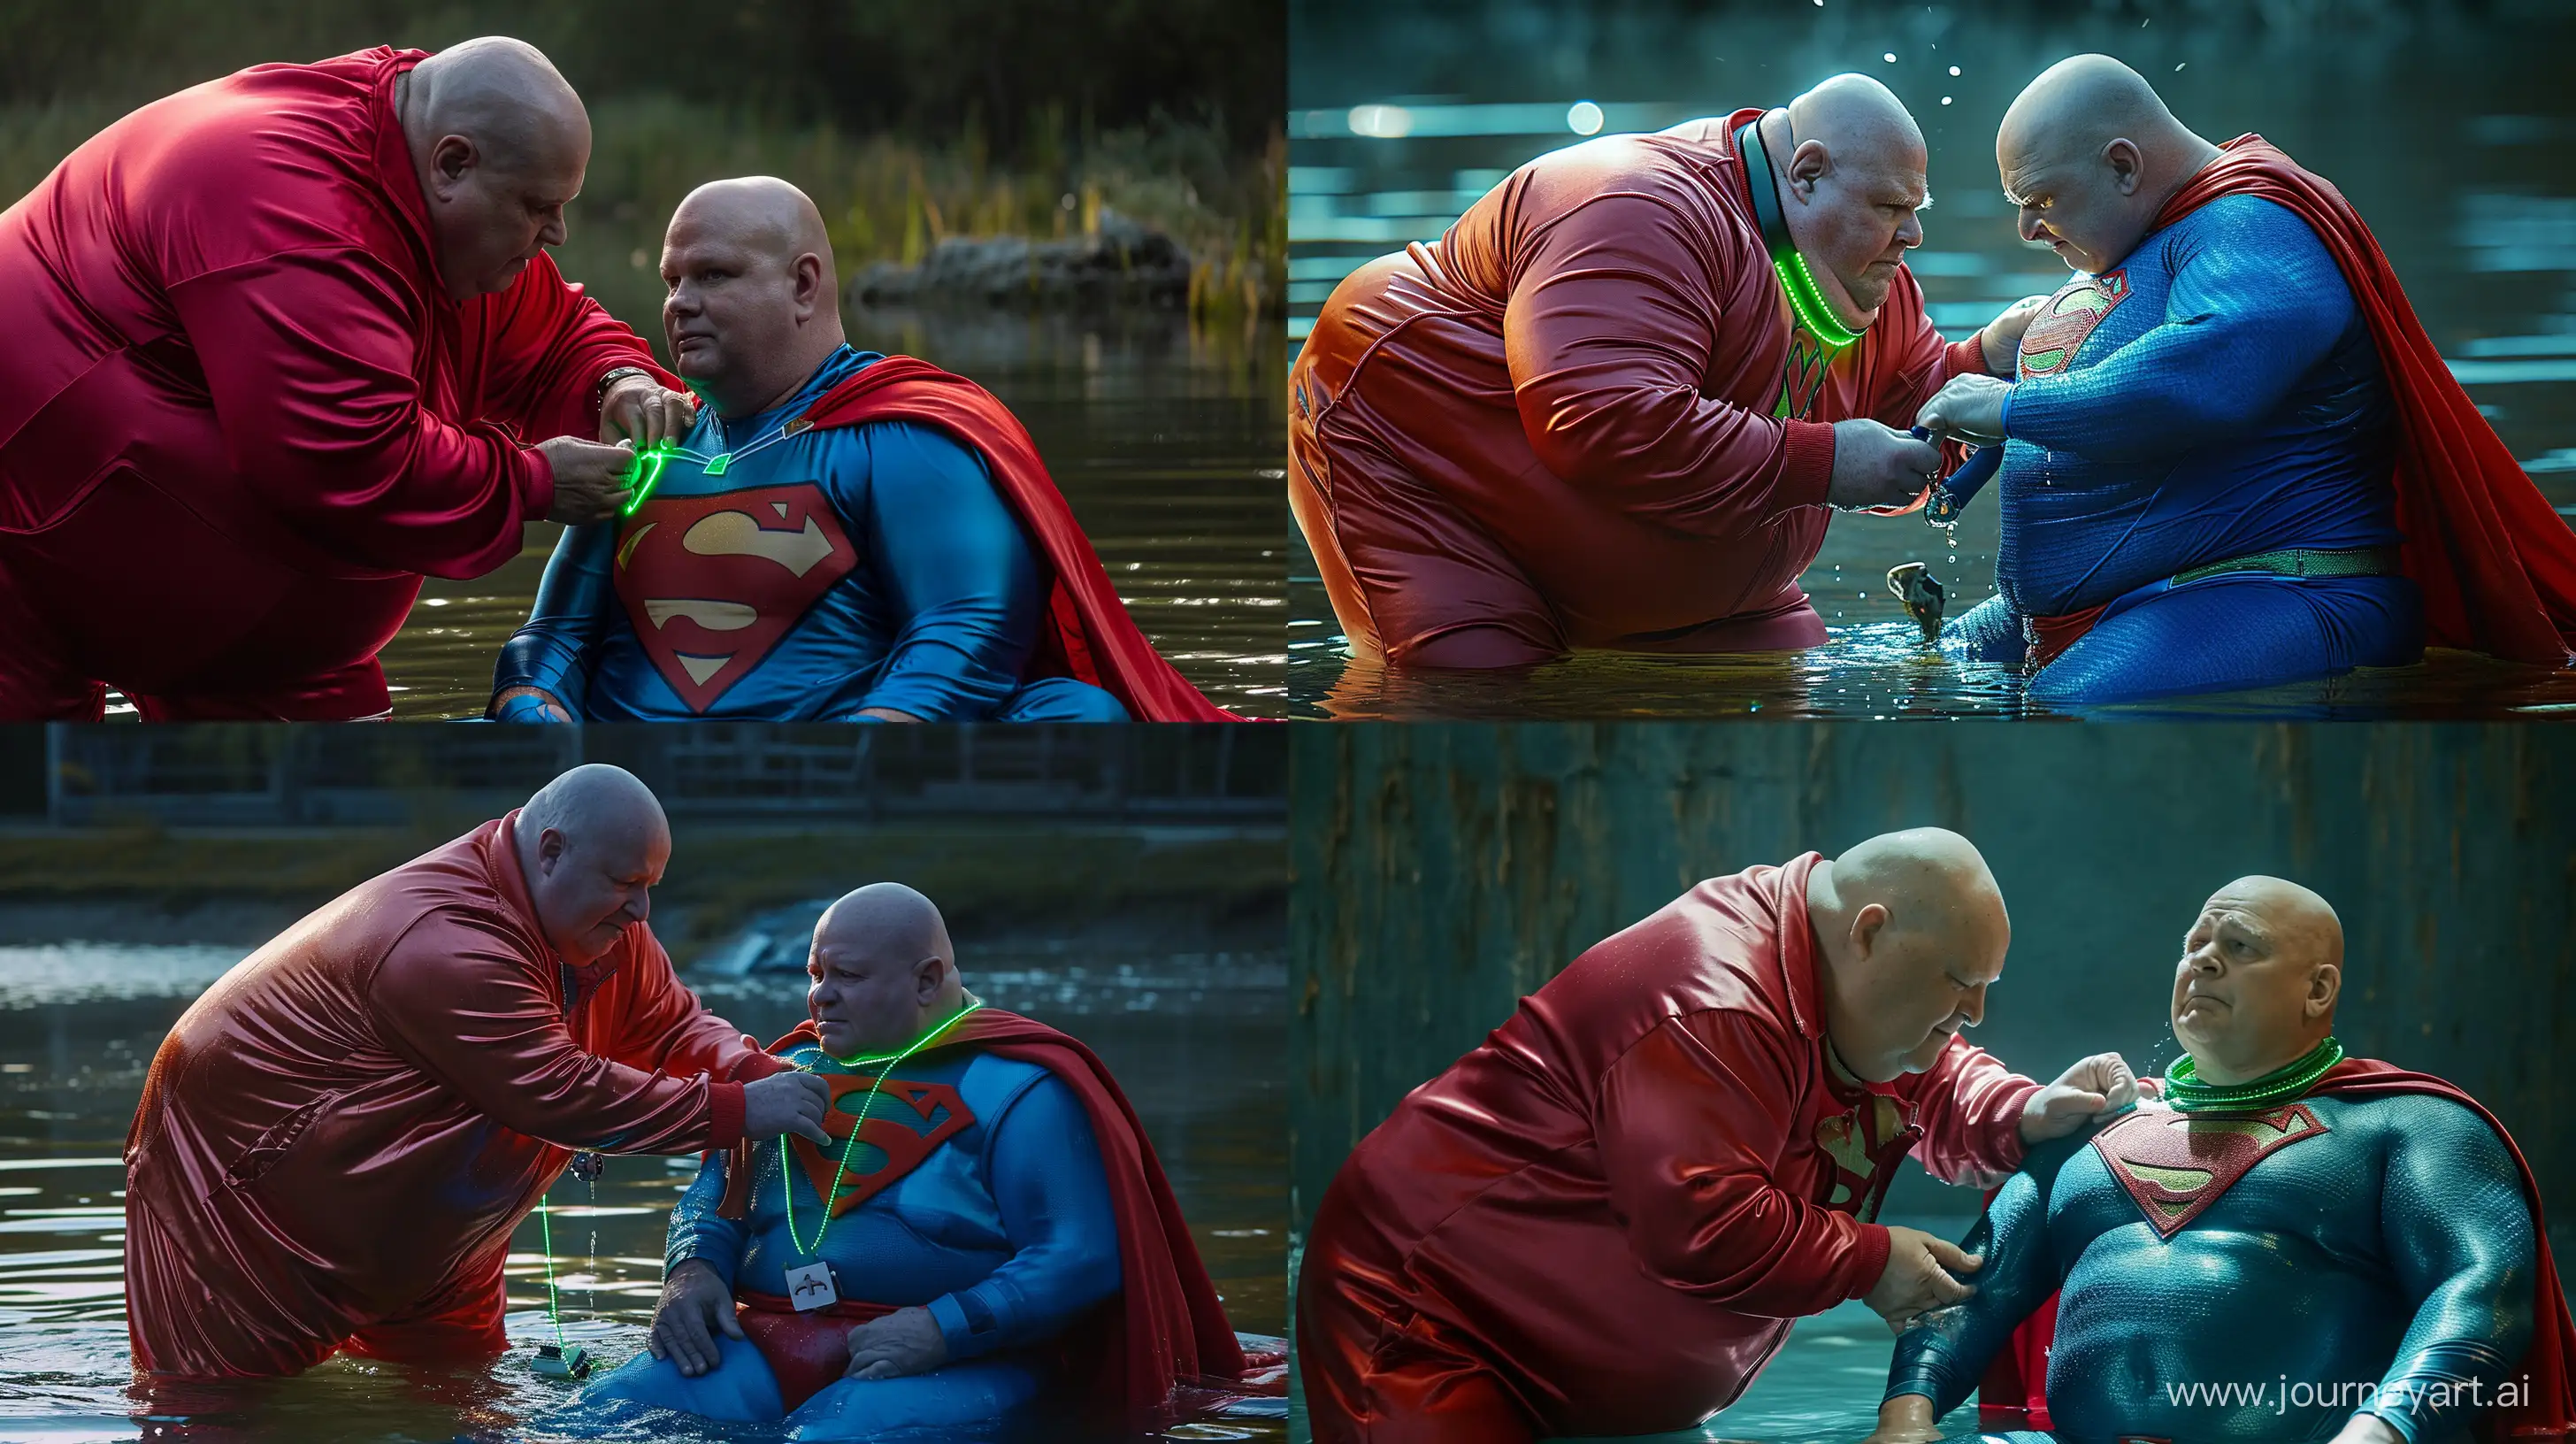 Elderly-Duos-Playful-Water-Adventure-Red-Tracksuit-Blue-Superman-Costume-and-Collar-Fun